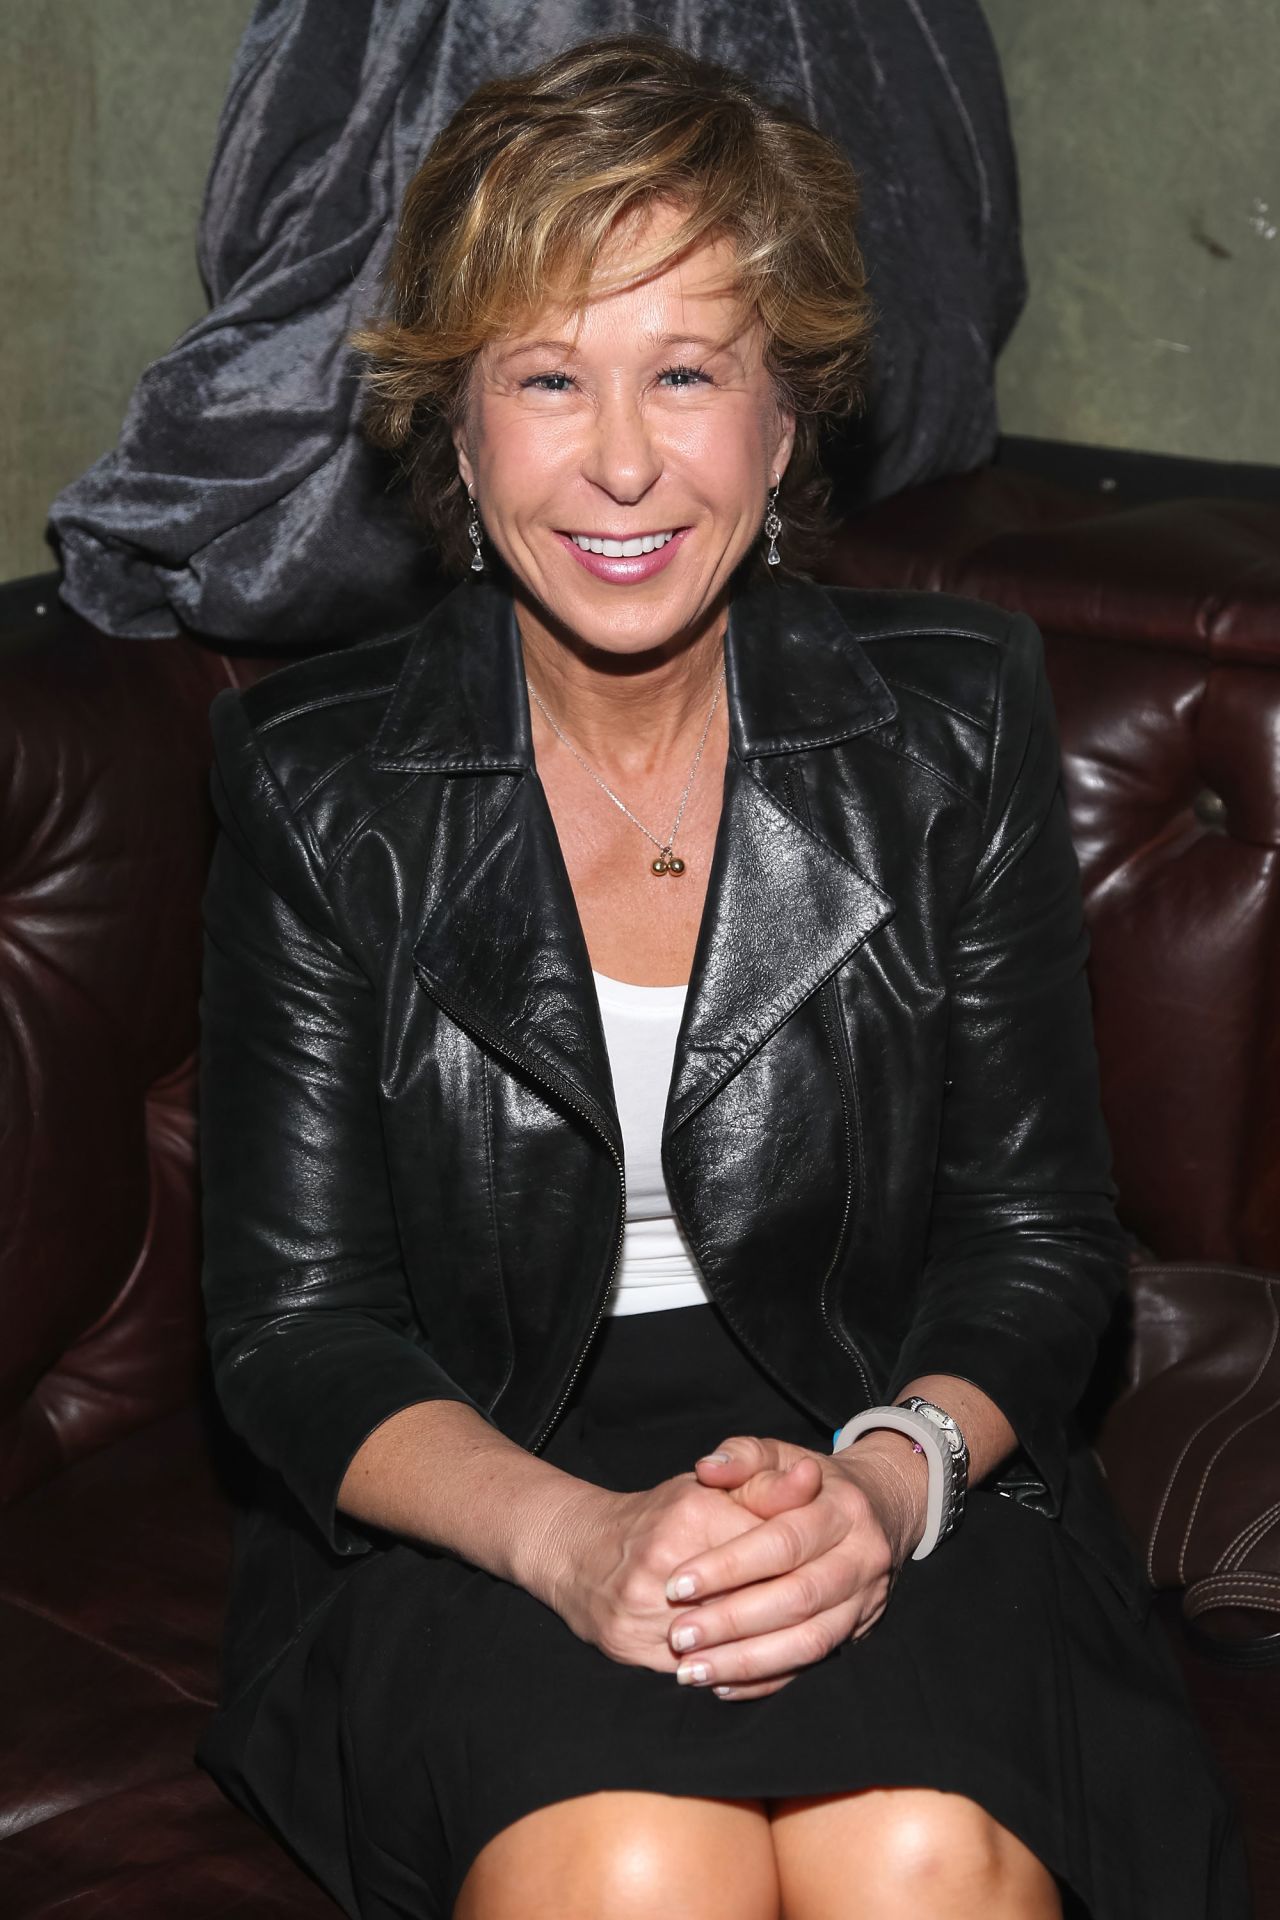 Yeardley Smith is a French-born writer and actor who is most recognizable as the voice of Lisa Simpson on the long-running show "The Simpsons." She won a Primetime Emmy for Outstanding Voice-Over Performance in 1992. Smith, born on July 3, 1964, has since branched out into shoe design with her own label, Marchez Vous. 